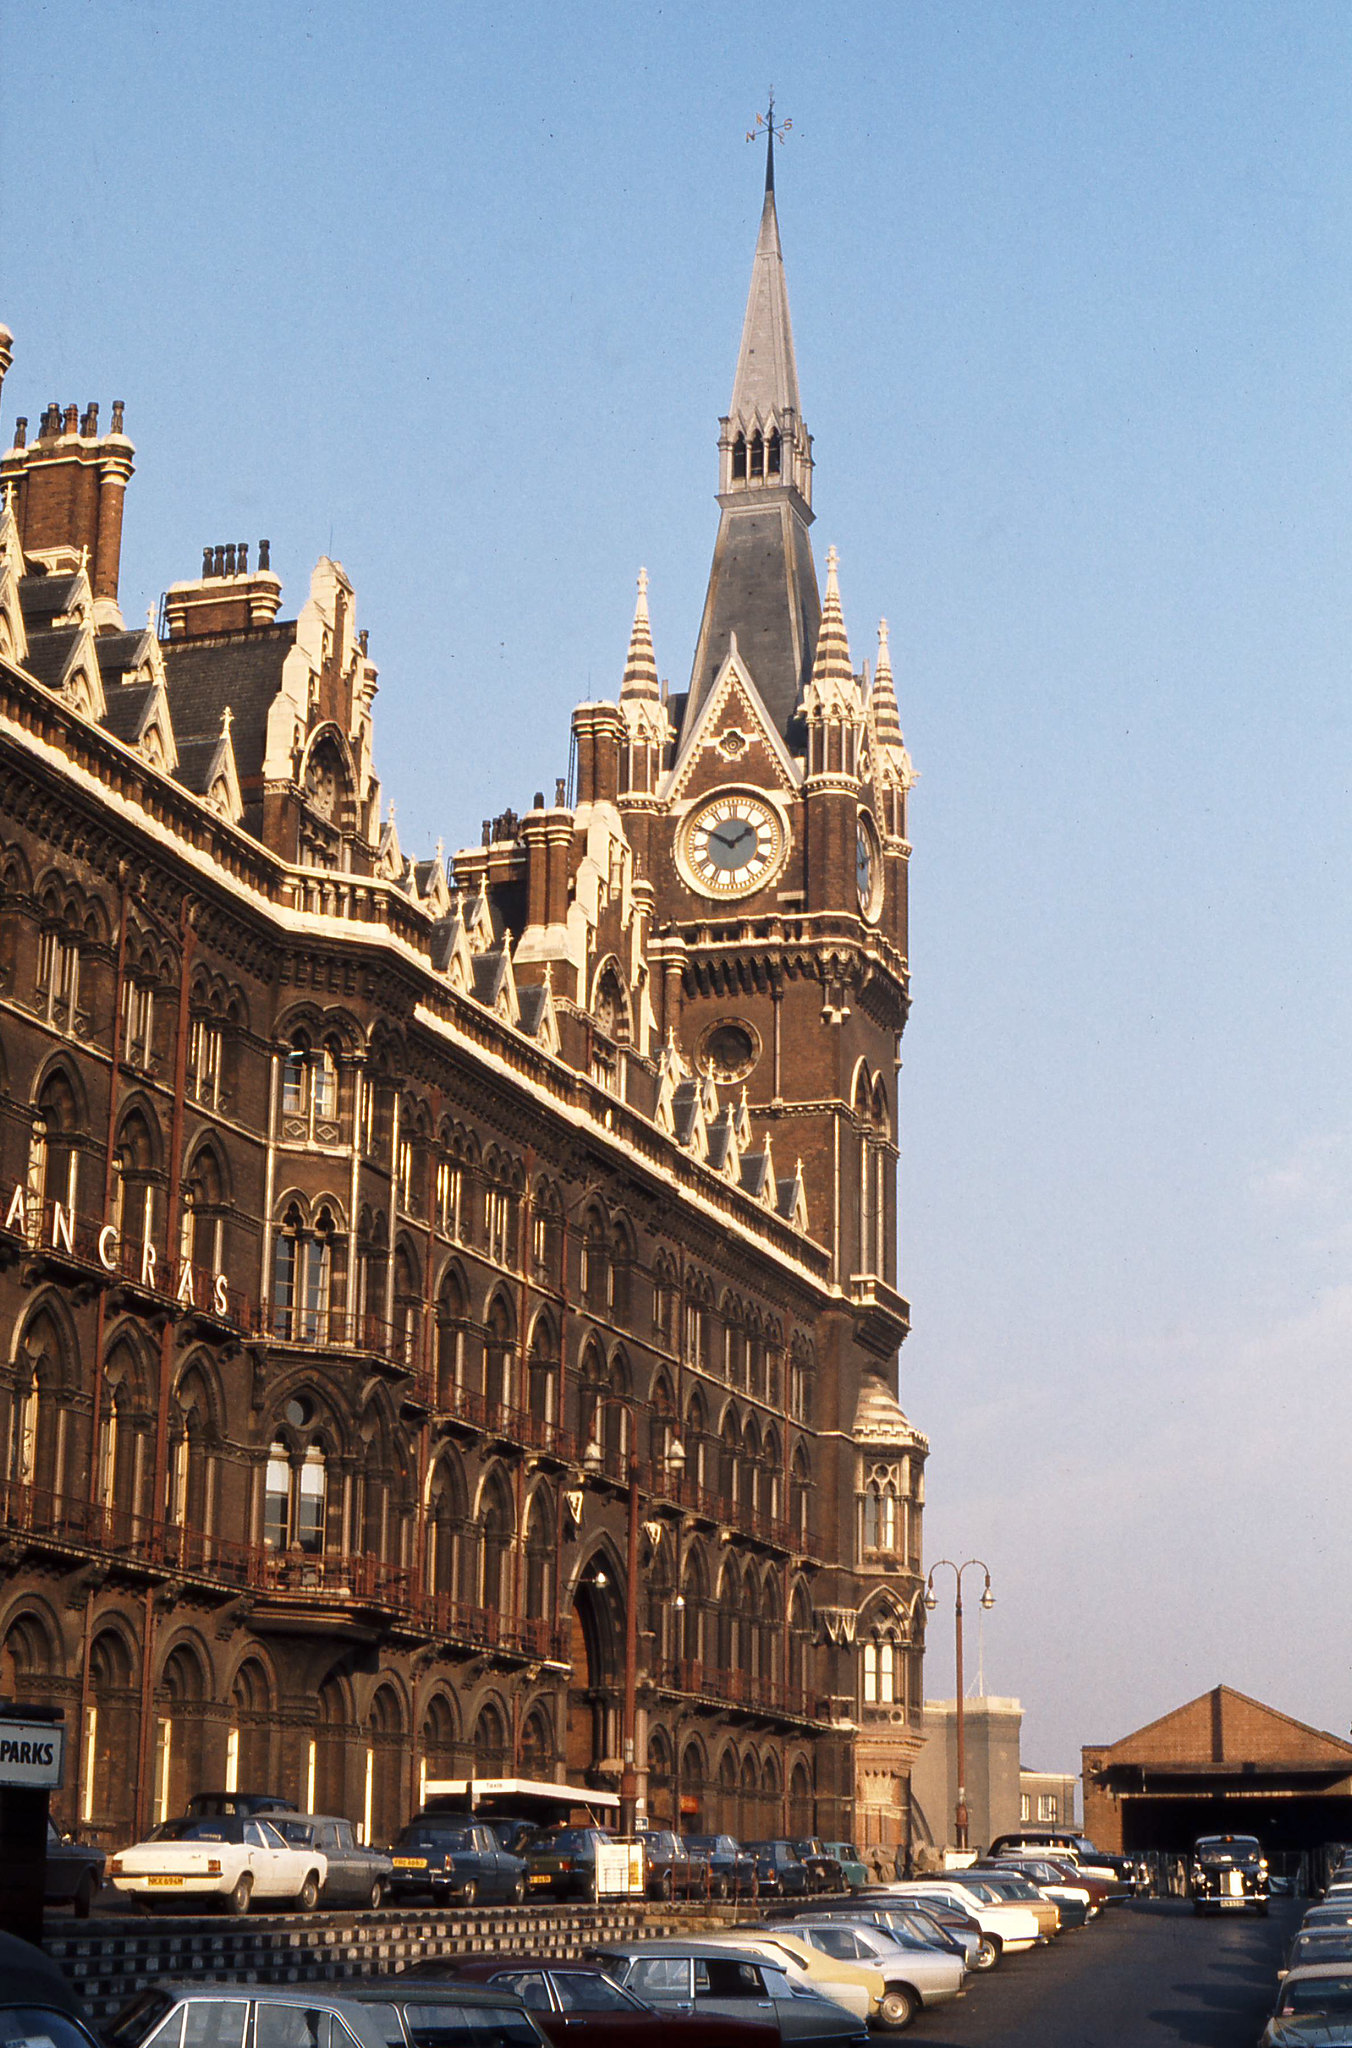 St. Pancras station frontage on 24th November 1975.